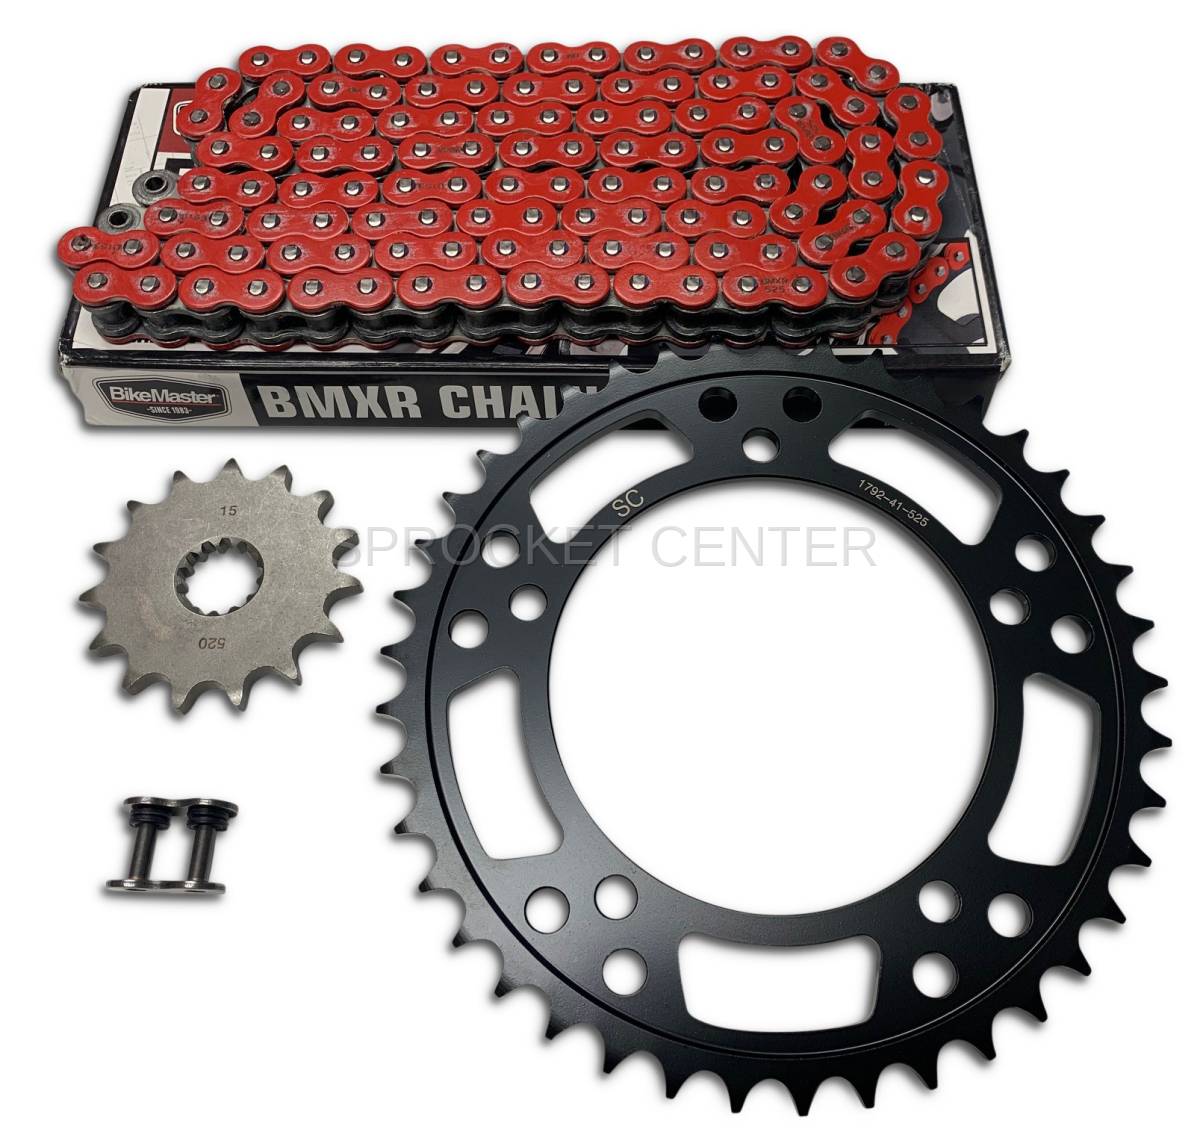 520 JT Sprockets and Drive Chain Kit for Honda CBR500 2013-2018